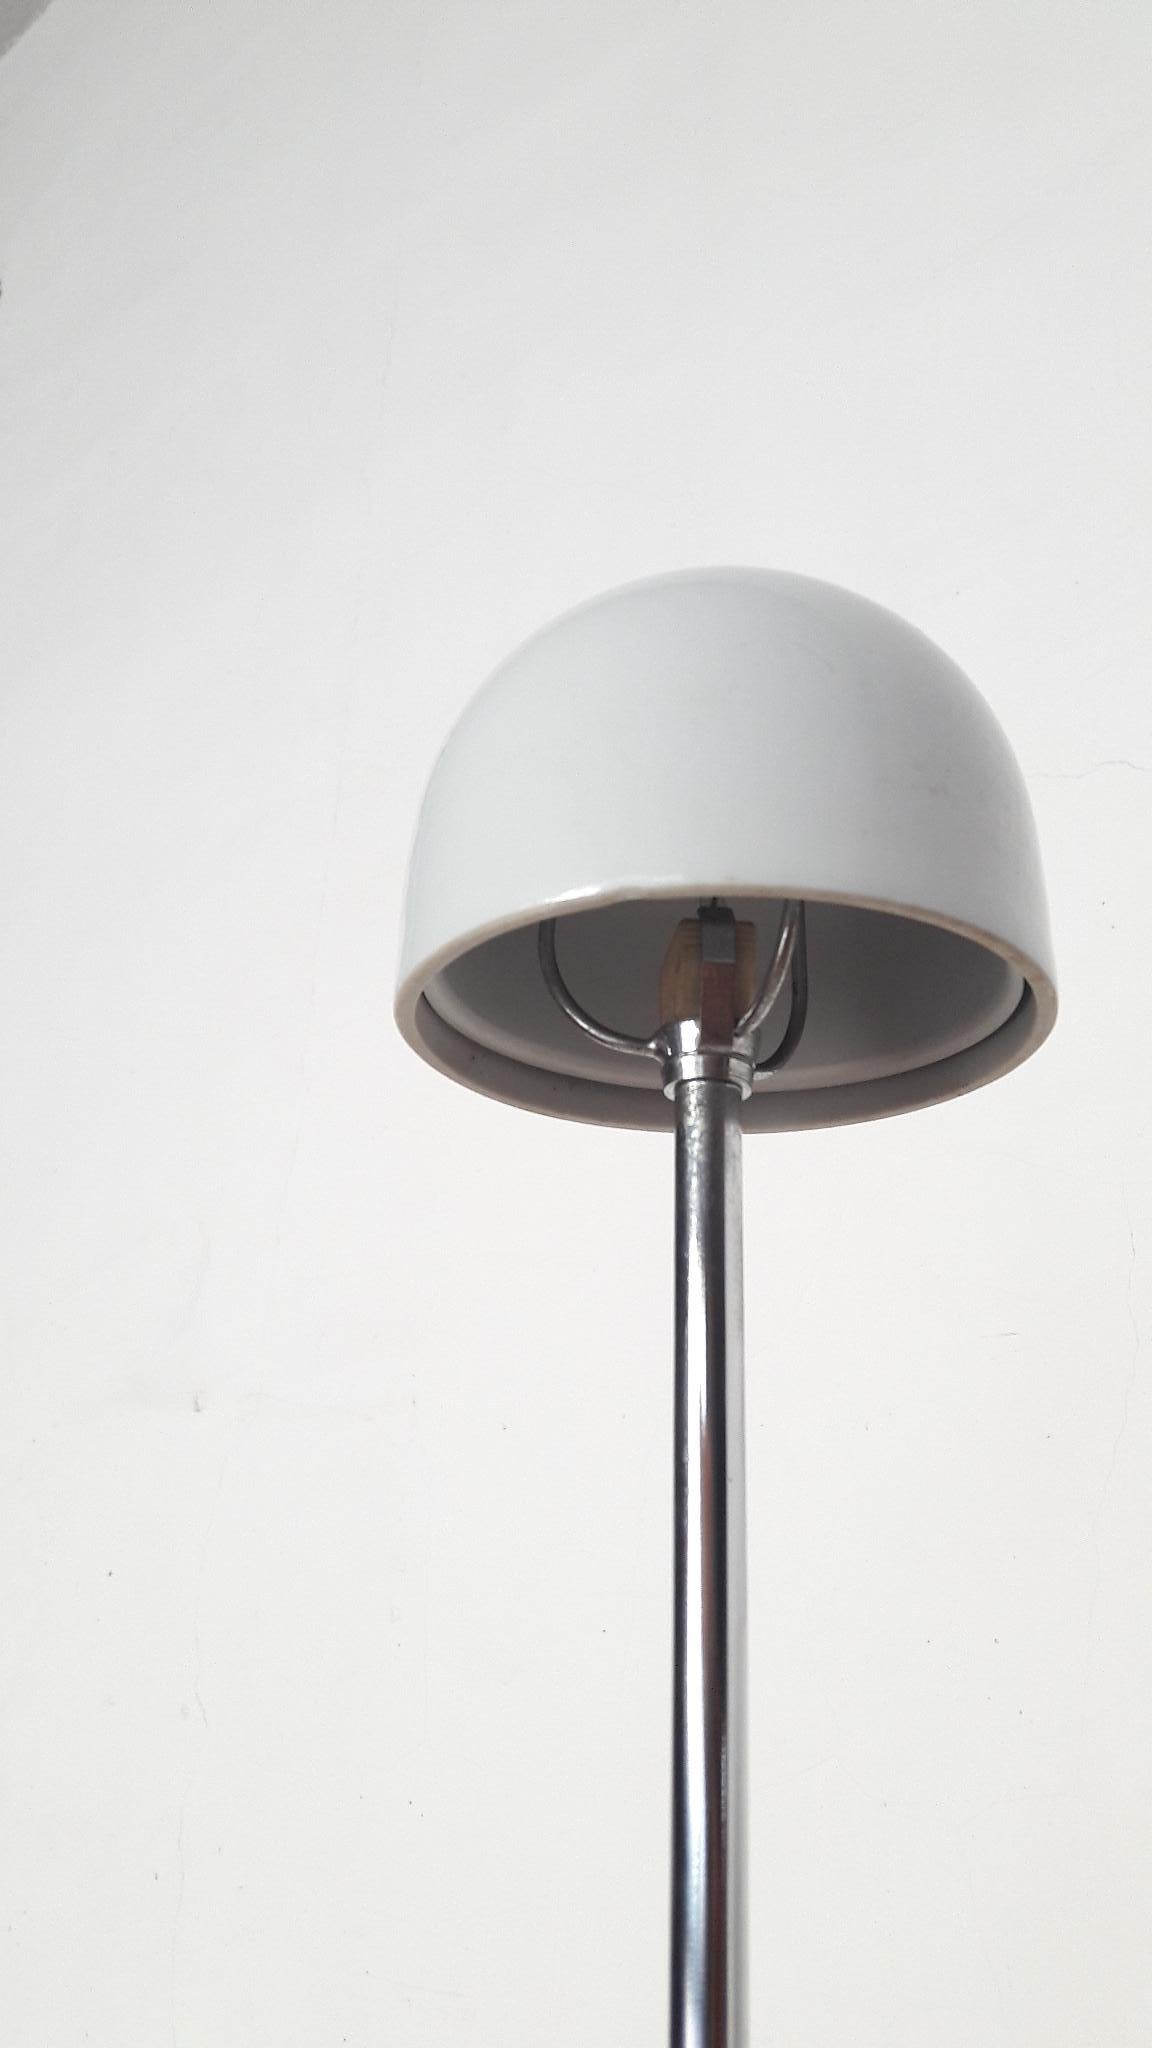 'Nemea' a very original table lamp by Vico Magistretti, designed for Artemide in 1979. The parabola-shade is generated from a conical segment template cut in half, the design plays on the relationship between the circular disk base and a very small